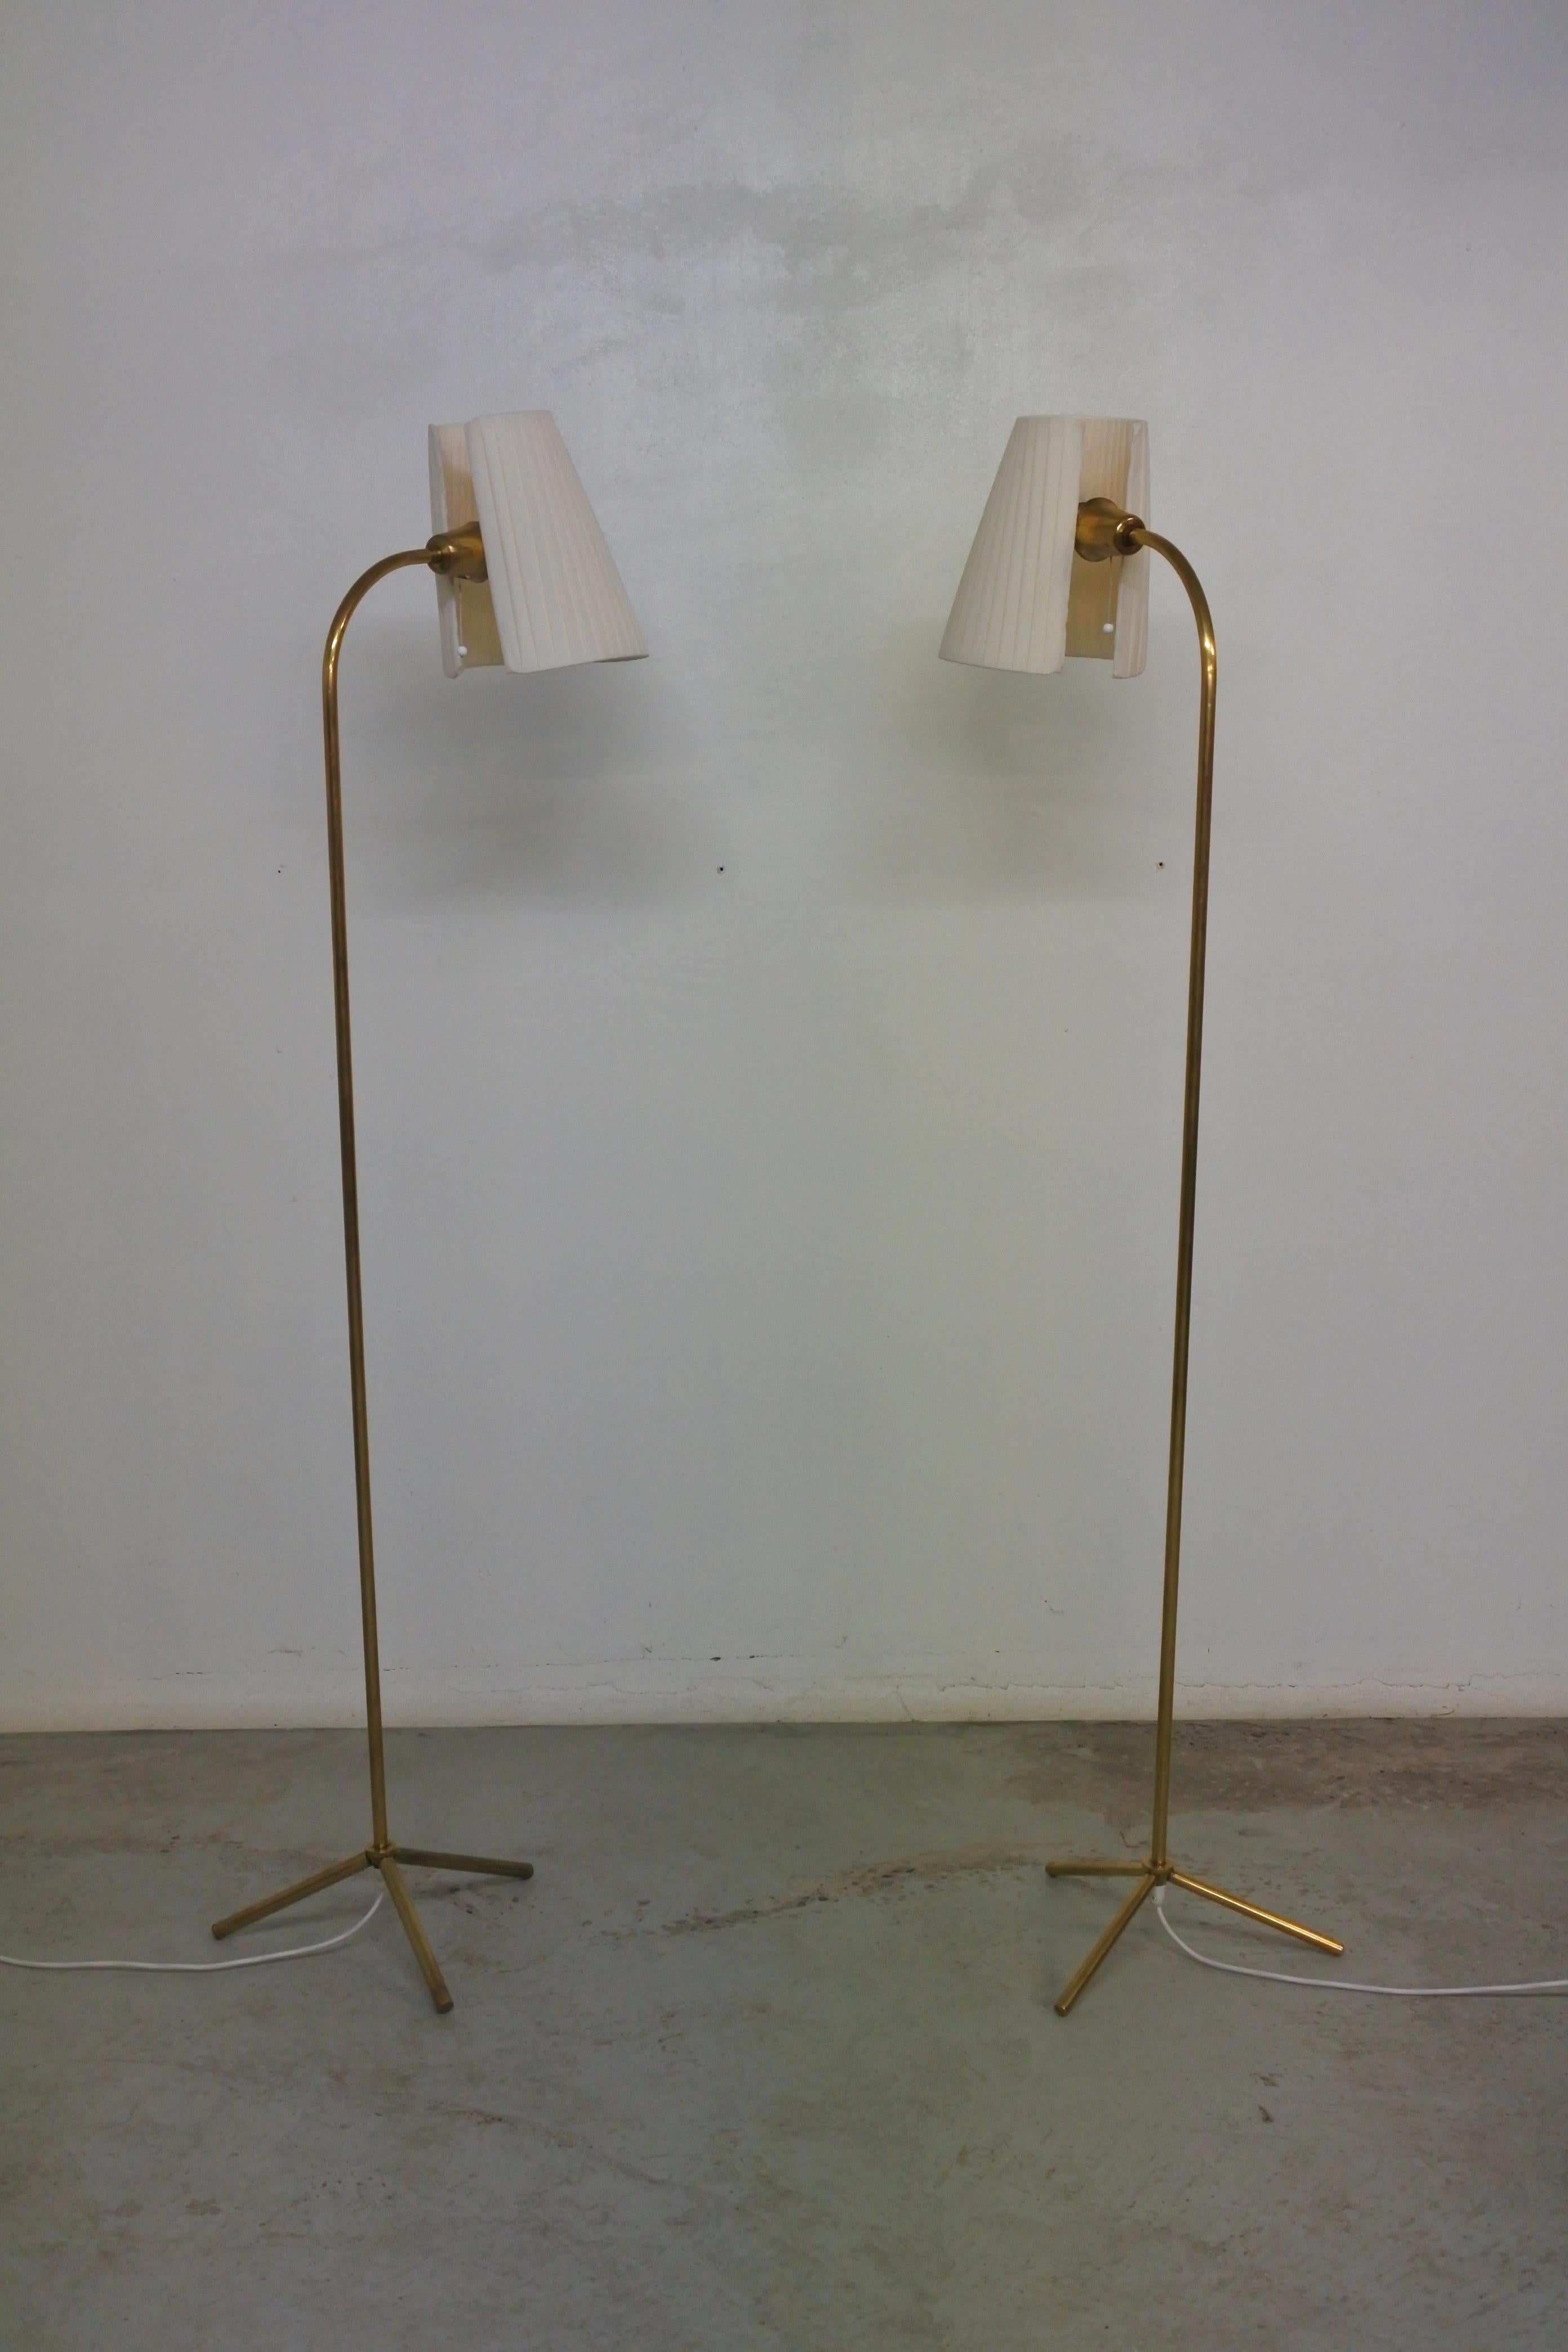 Mid-20th Century Tripod Floor Lamps in Brass by Lisa Johansson-Pape & Orno, Finland 1950s For Sale